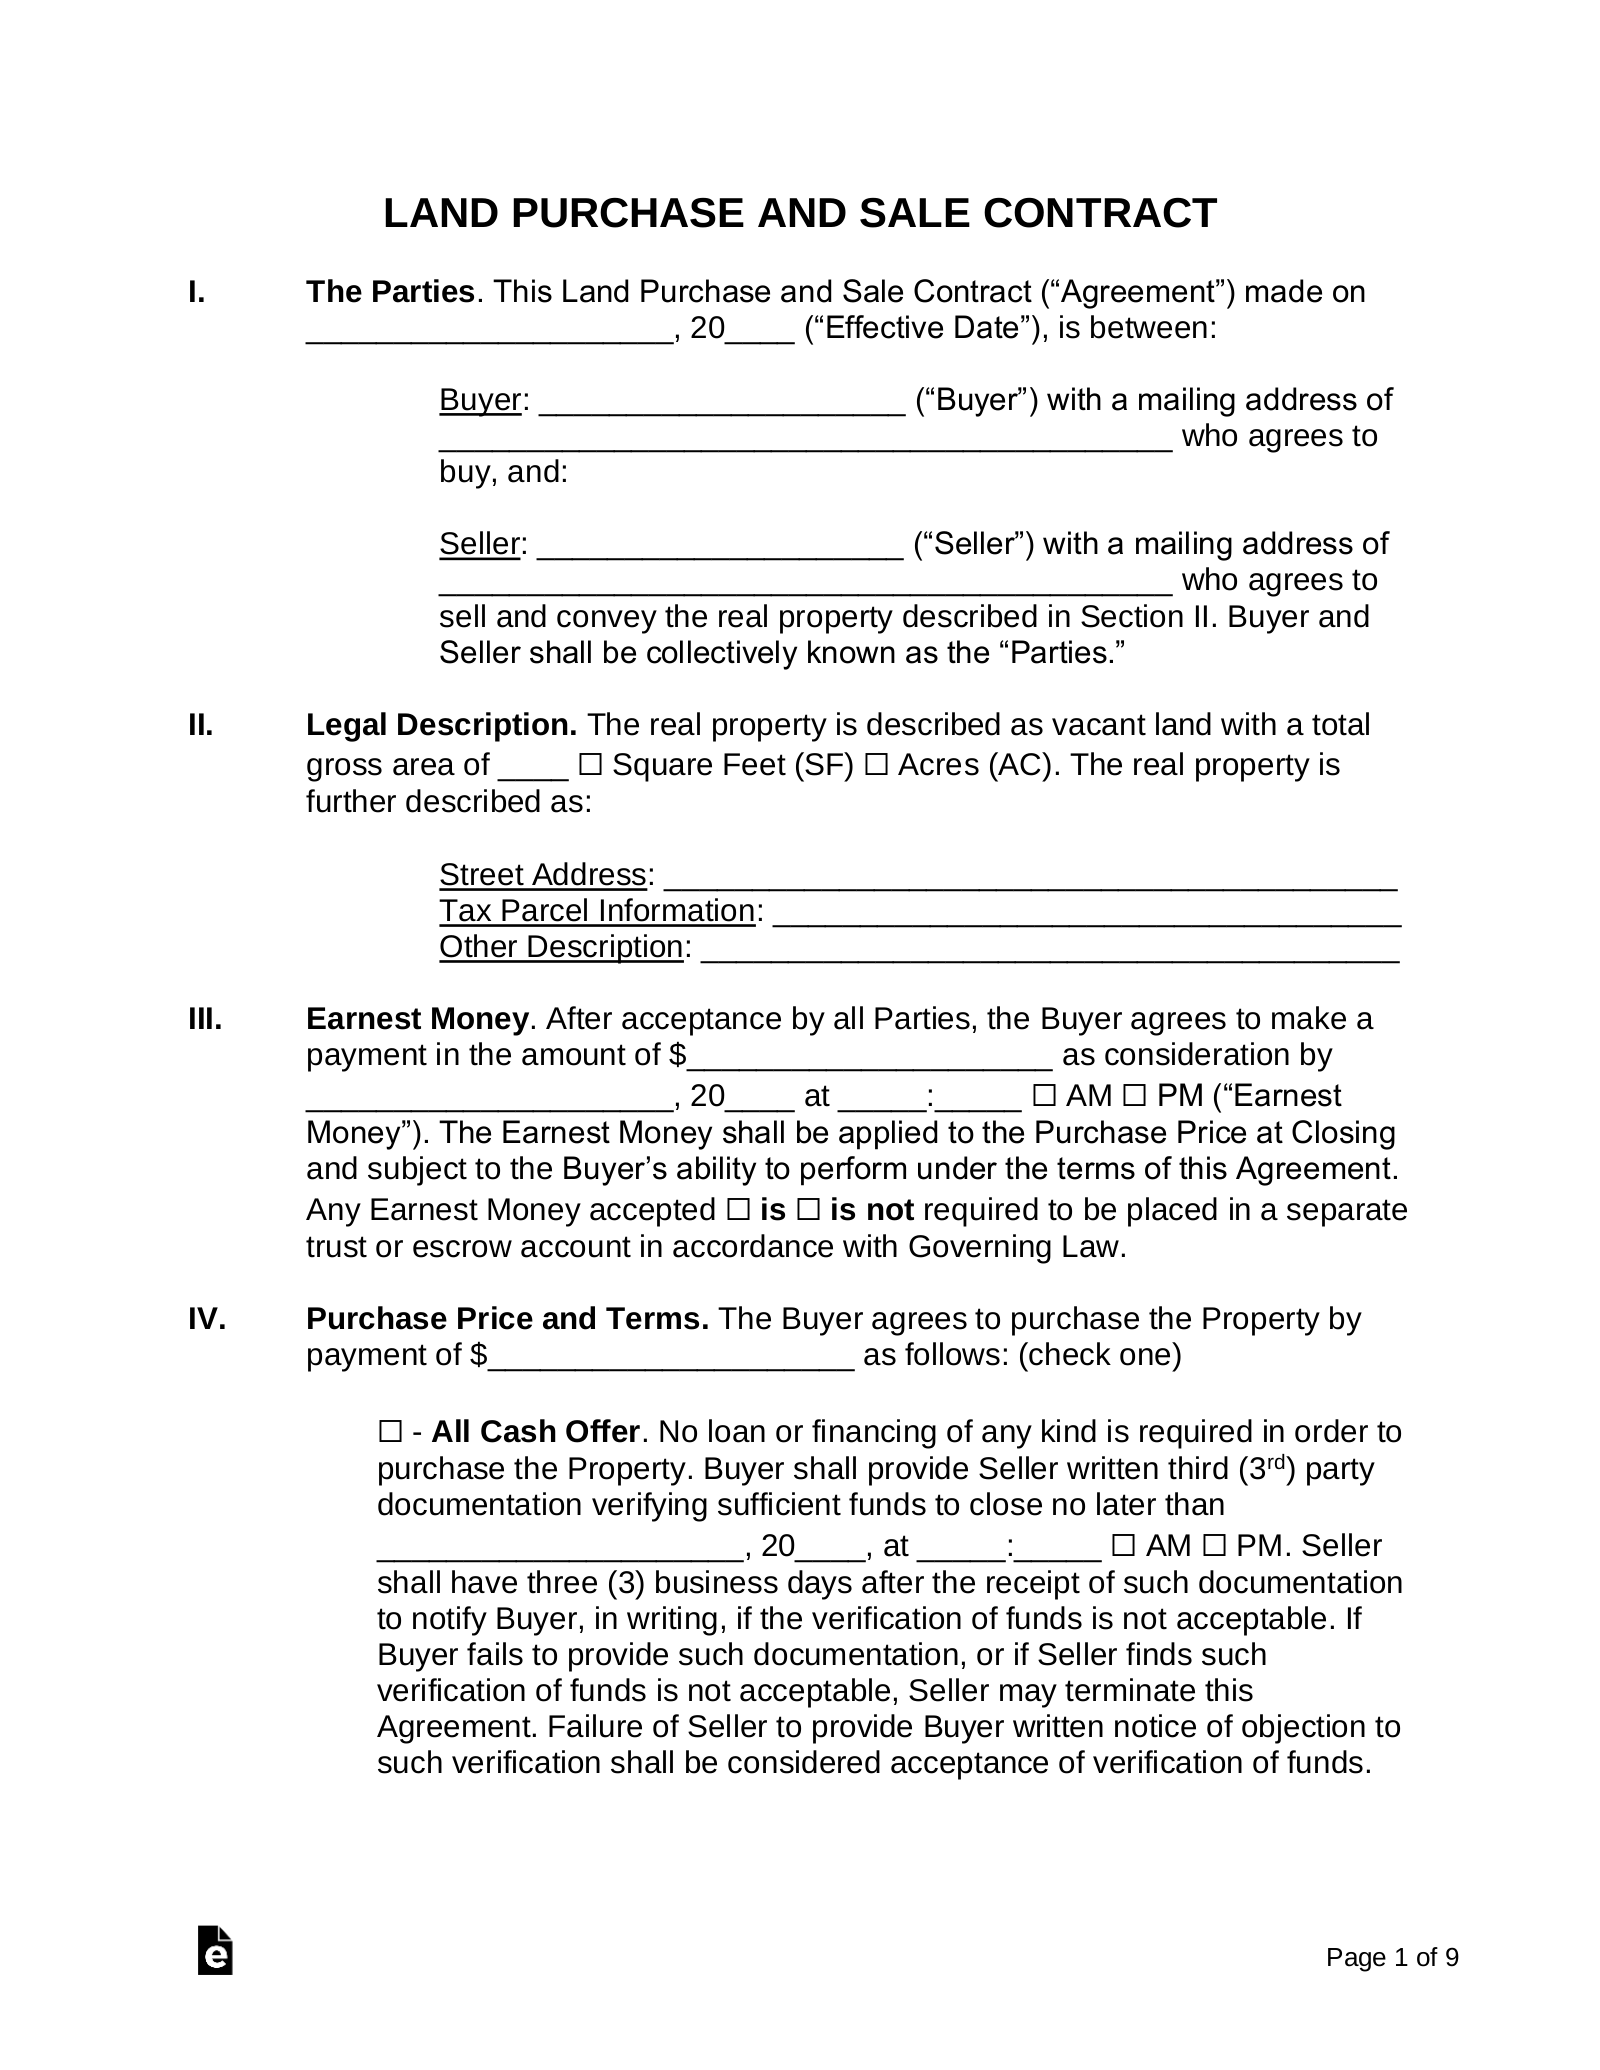 Land Purchase And Sale Contract 